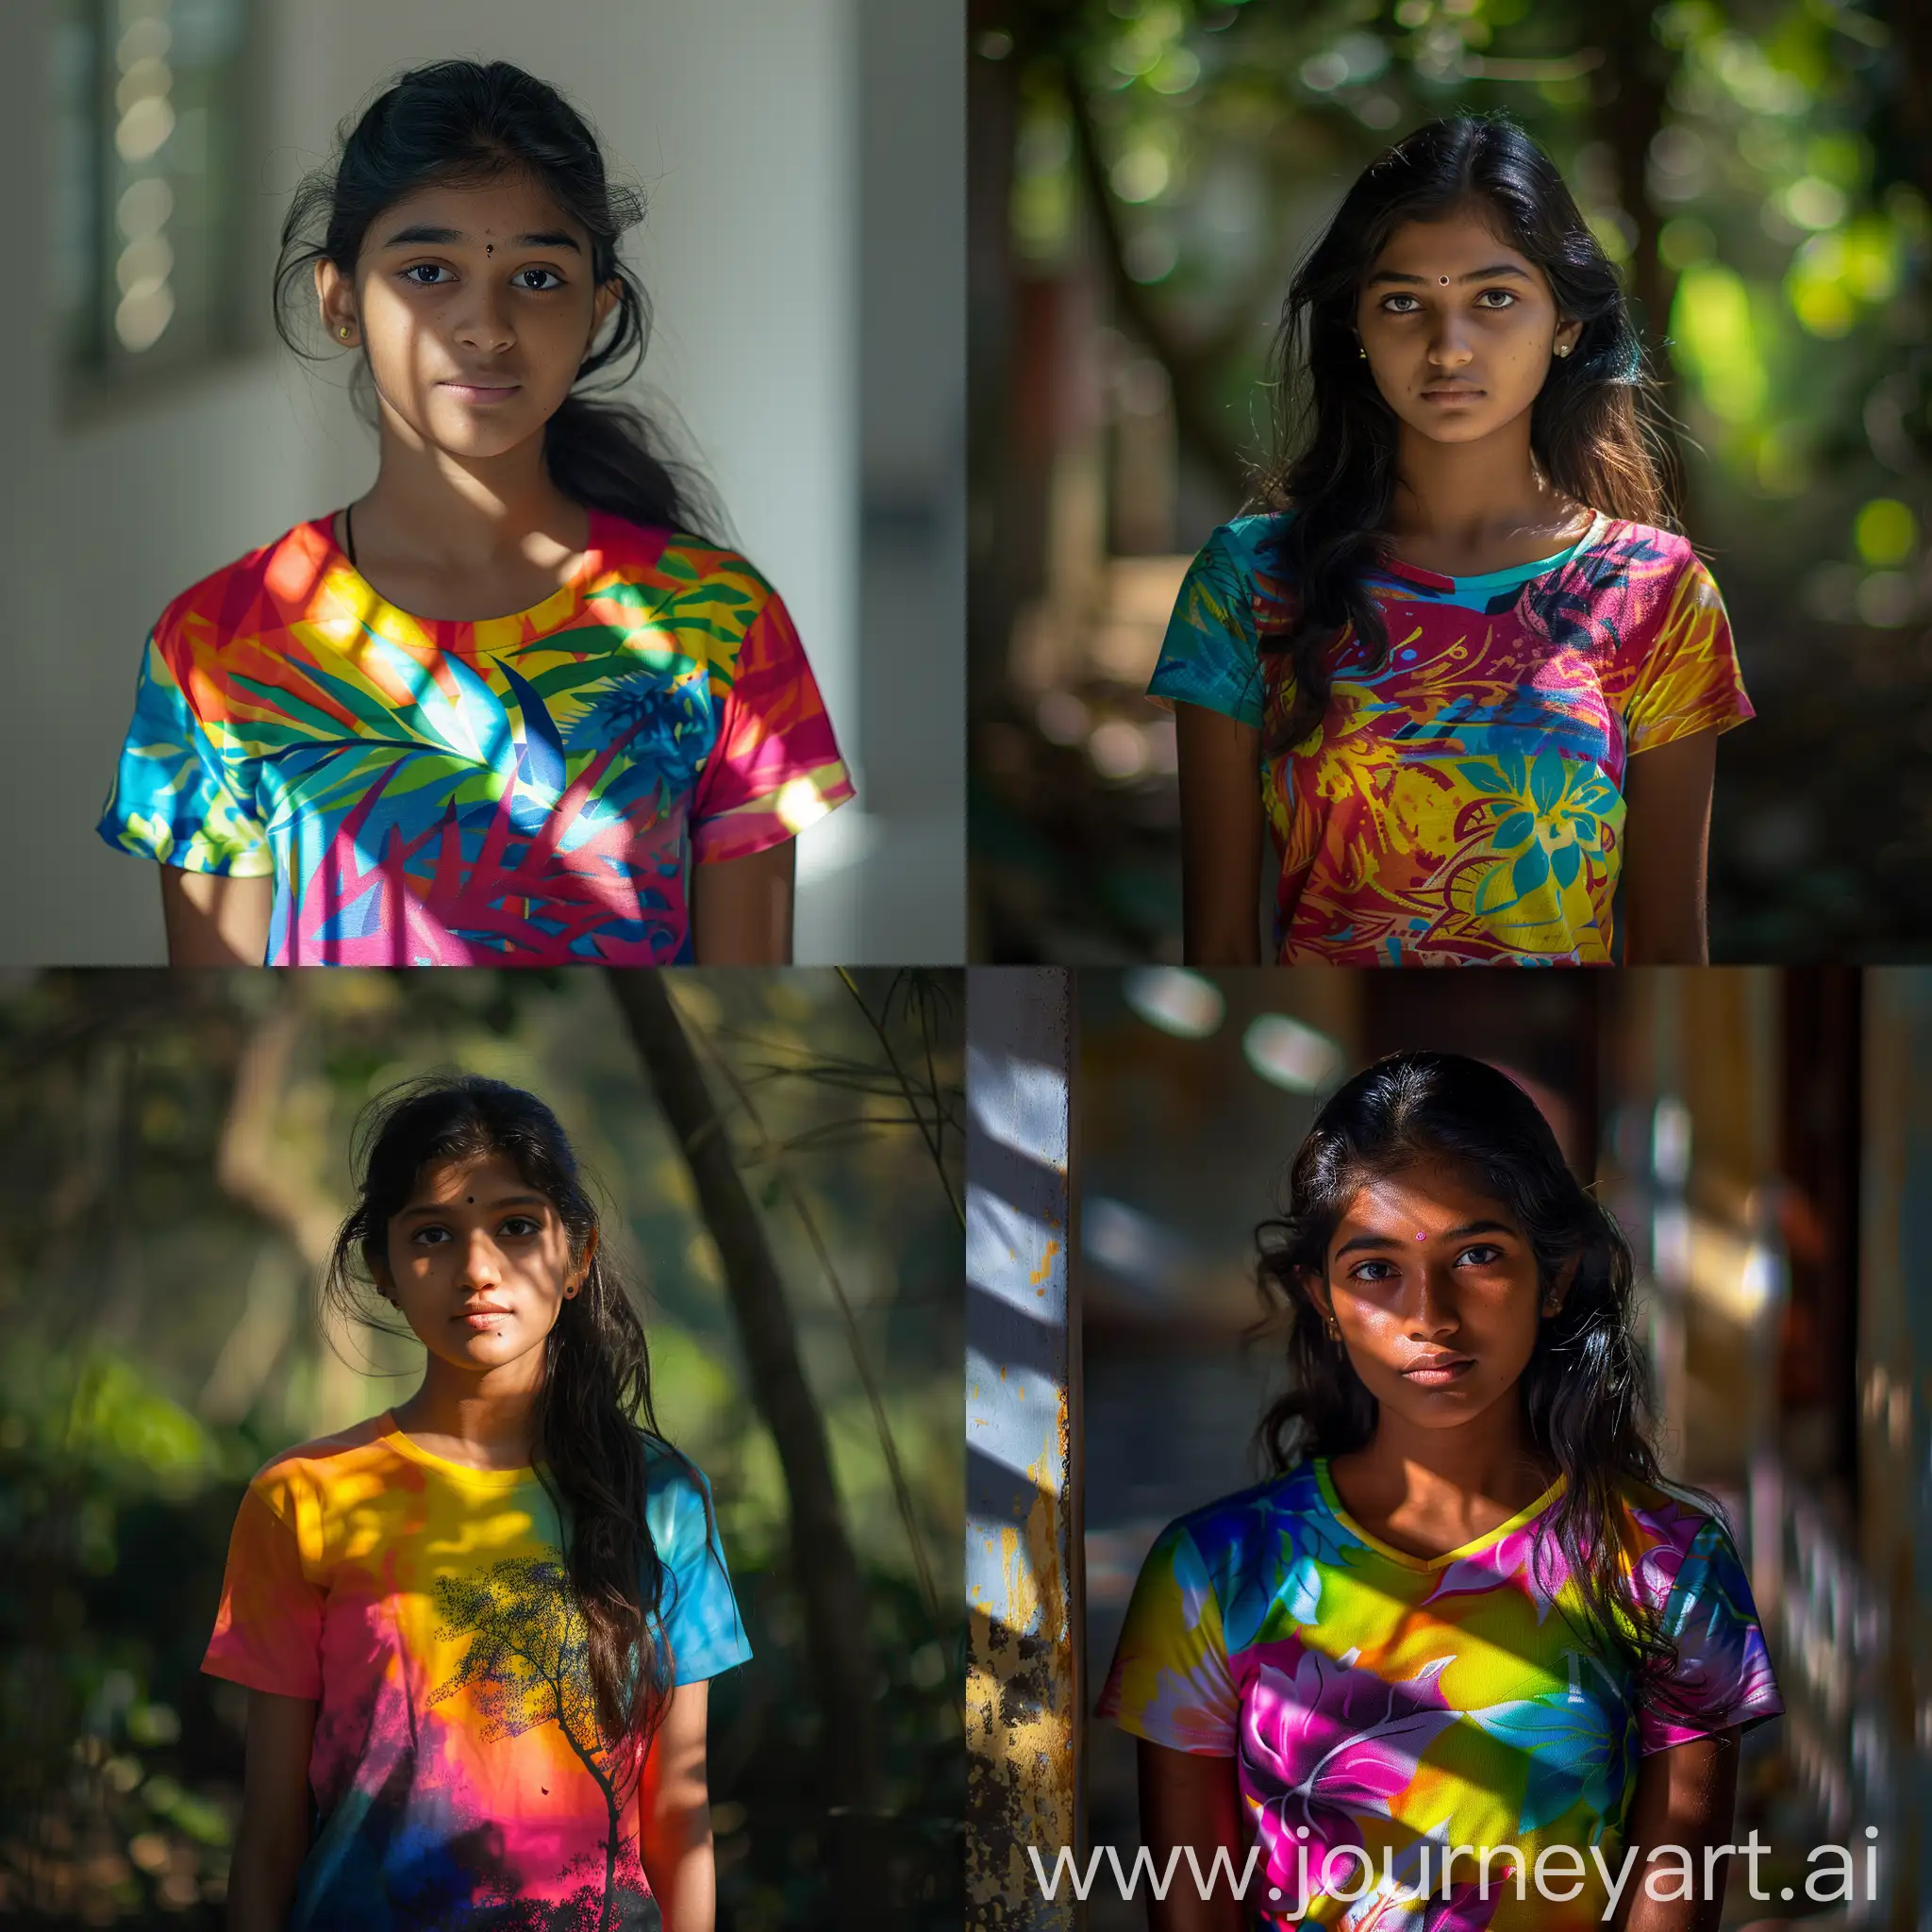 Stunning-Malayali-Teen-in-Colorful-TShirt-High-Definition-Portrait-Photography